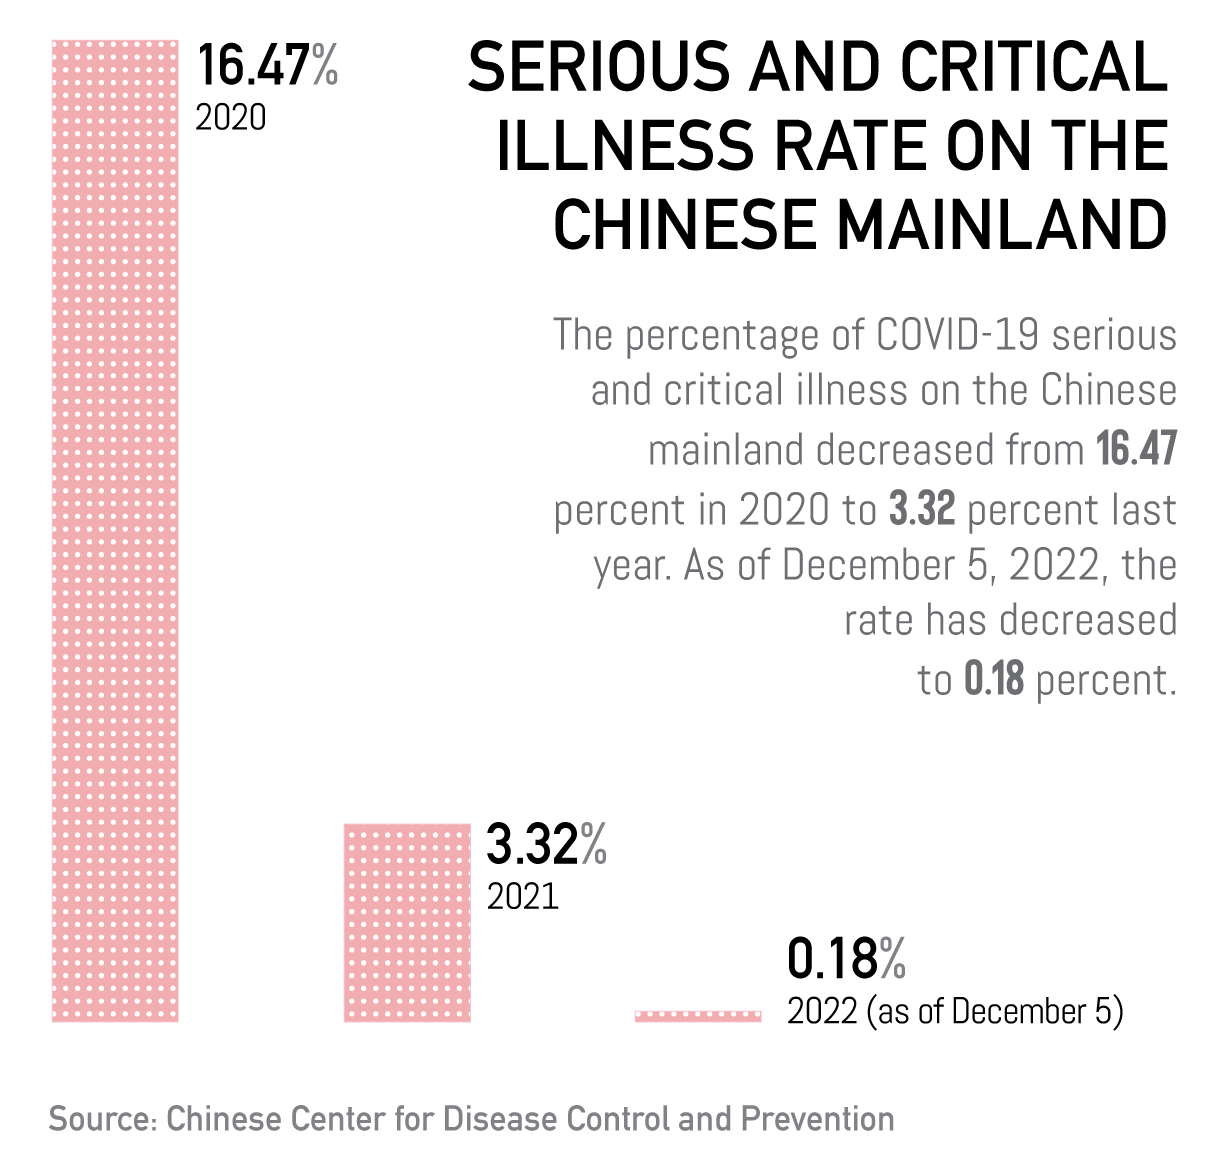 China's COVID-19 fight in numbers: To decrease serious and critical illness